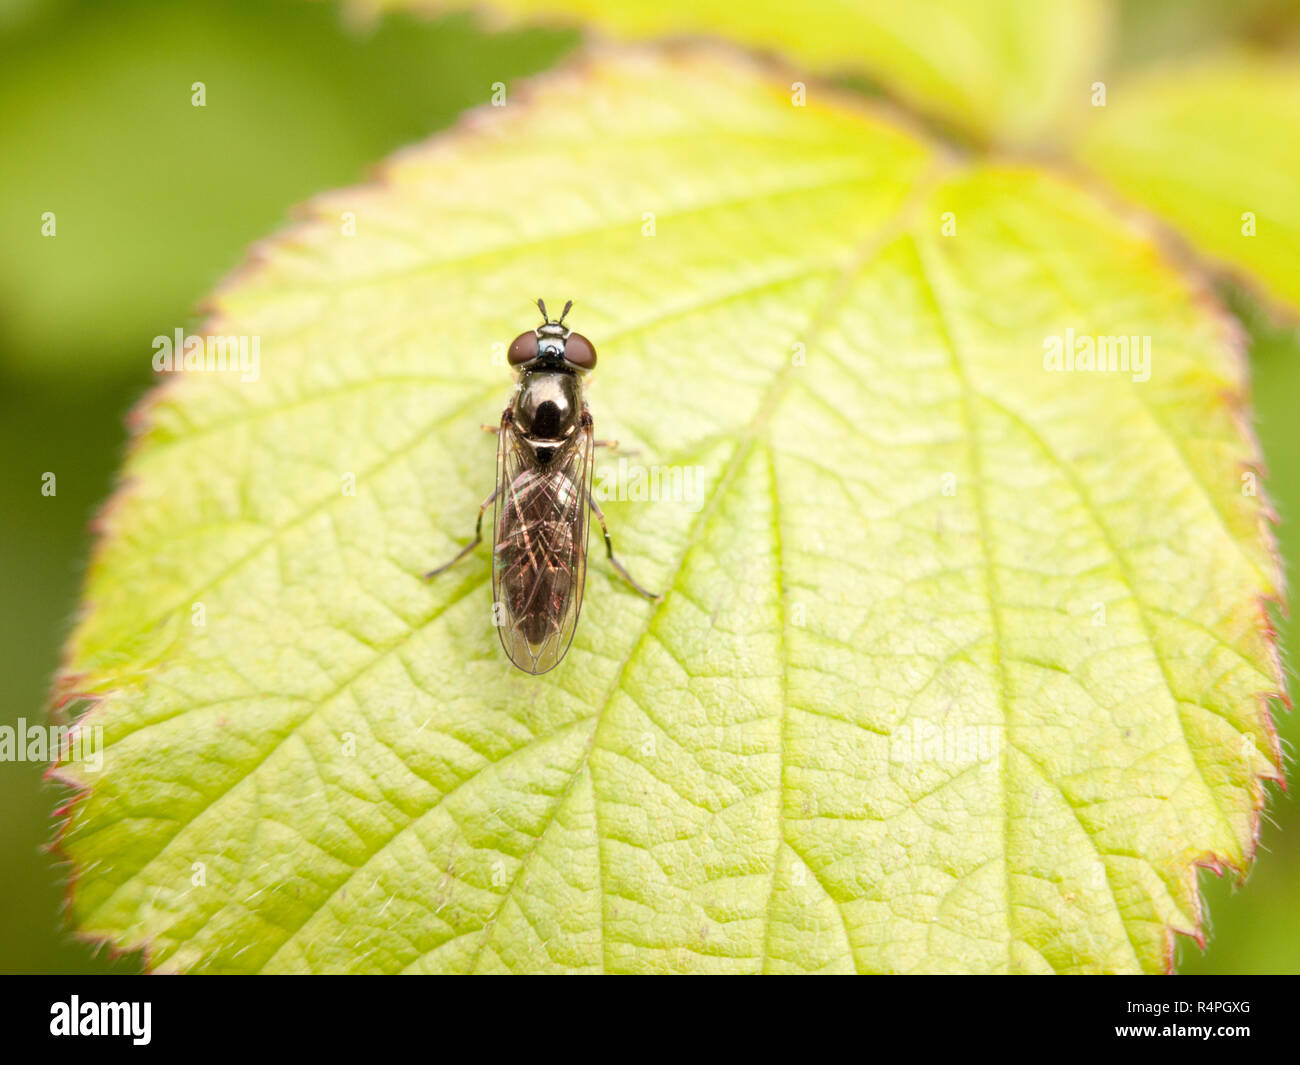 a small black fly with body wings and big eyes and antenna in clear sharp focus resting upon a leaf in the forest Stock Photo